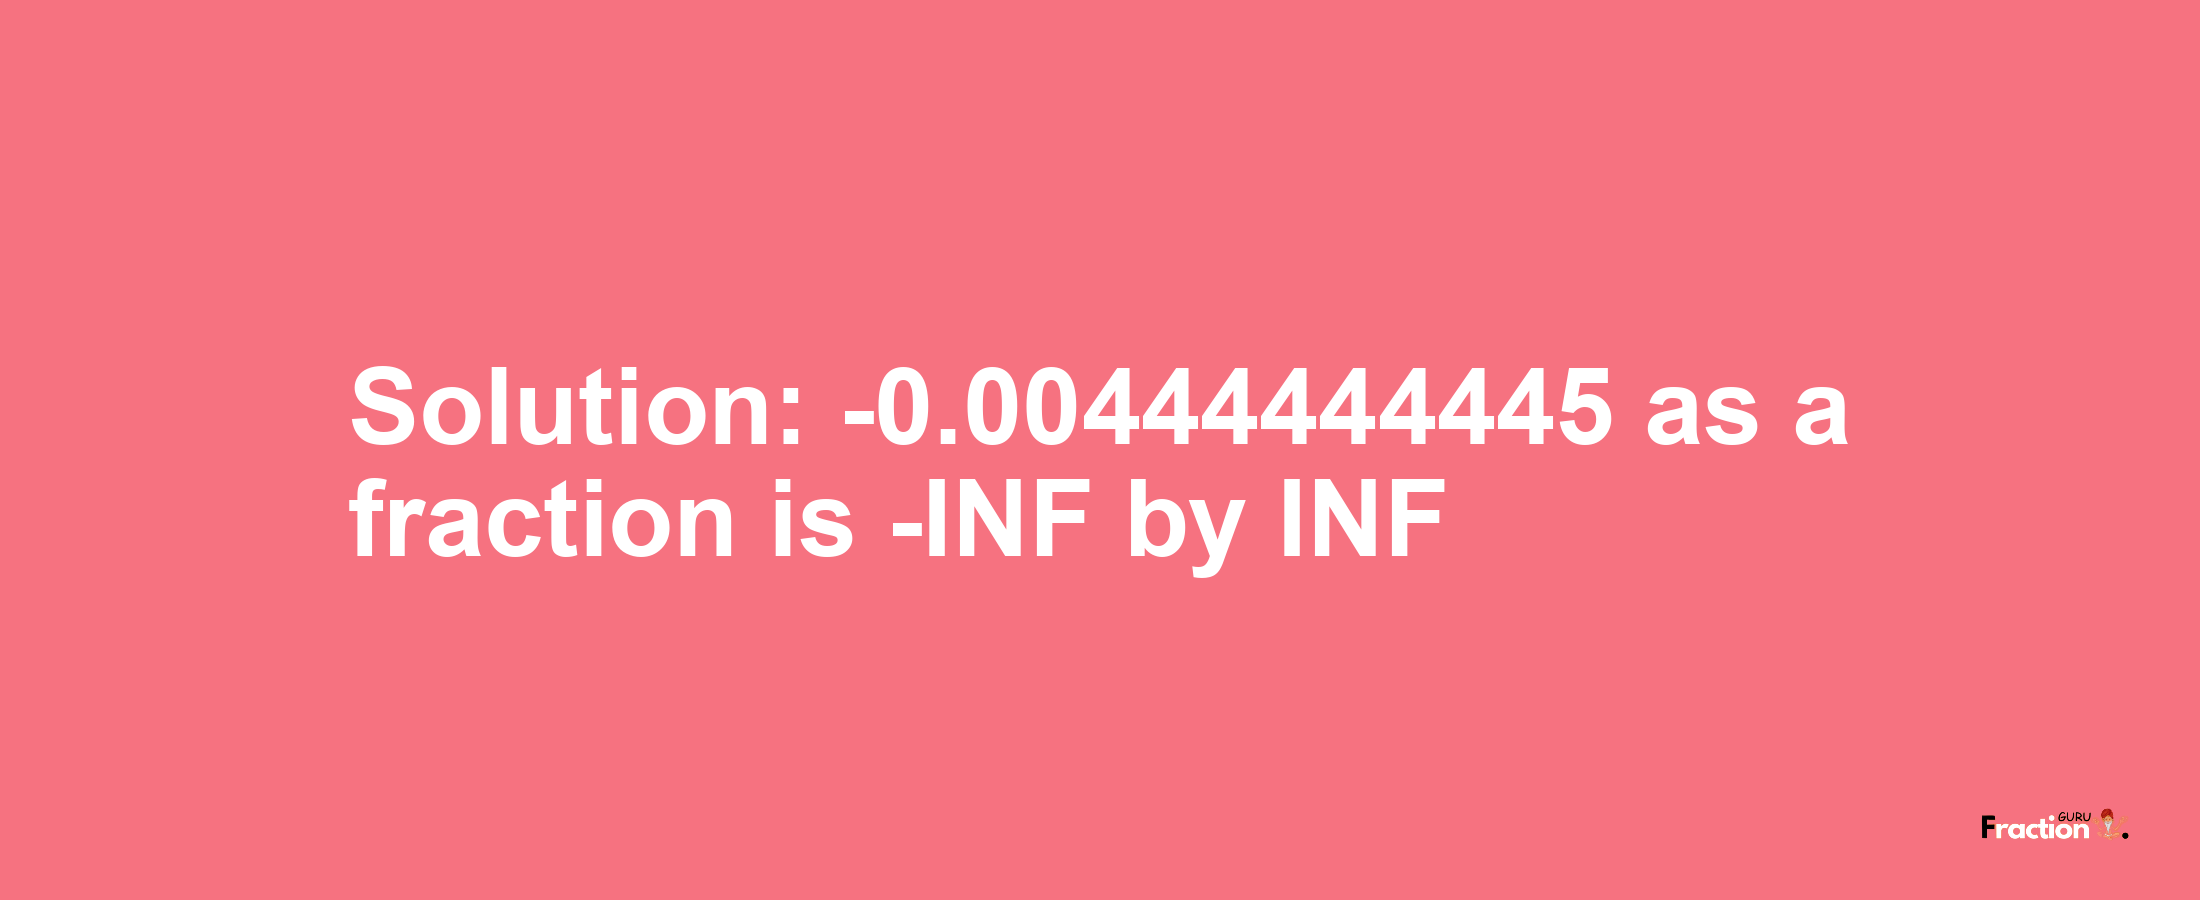 Solution:-0.00444444445 as a fraction is -INF/INF